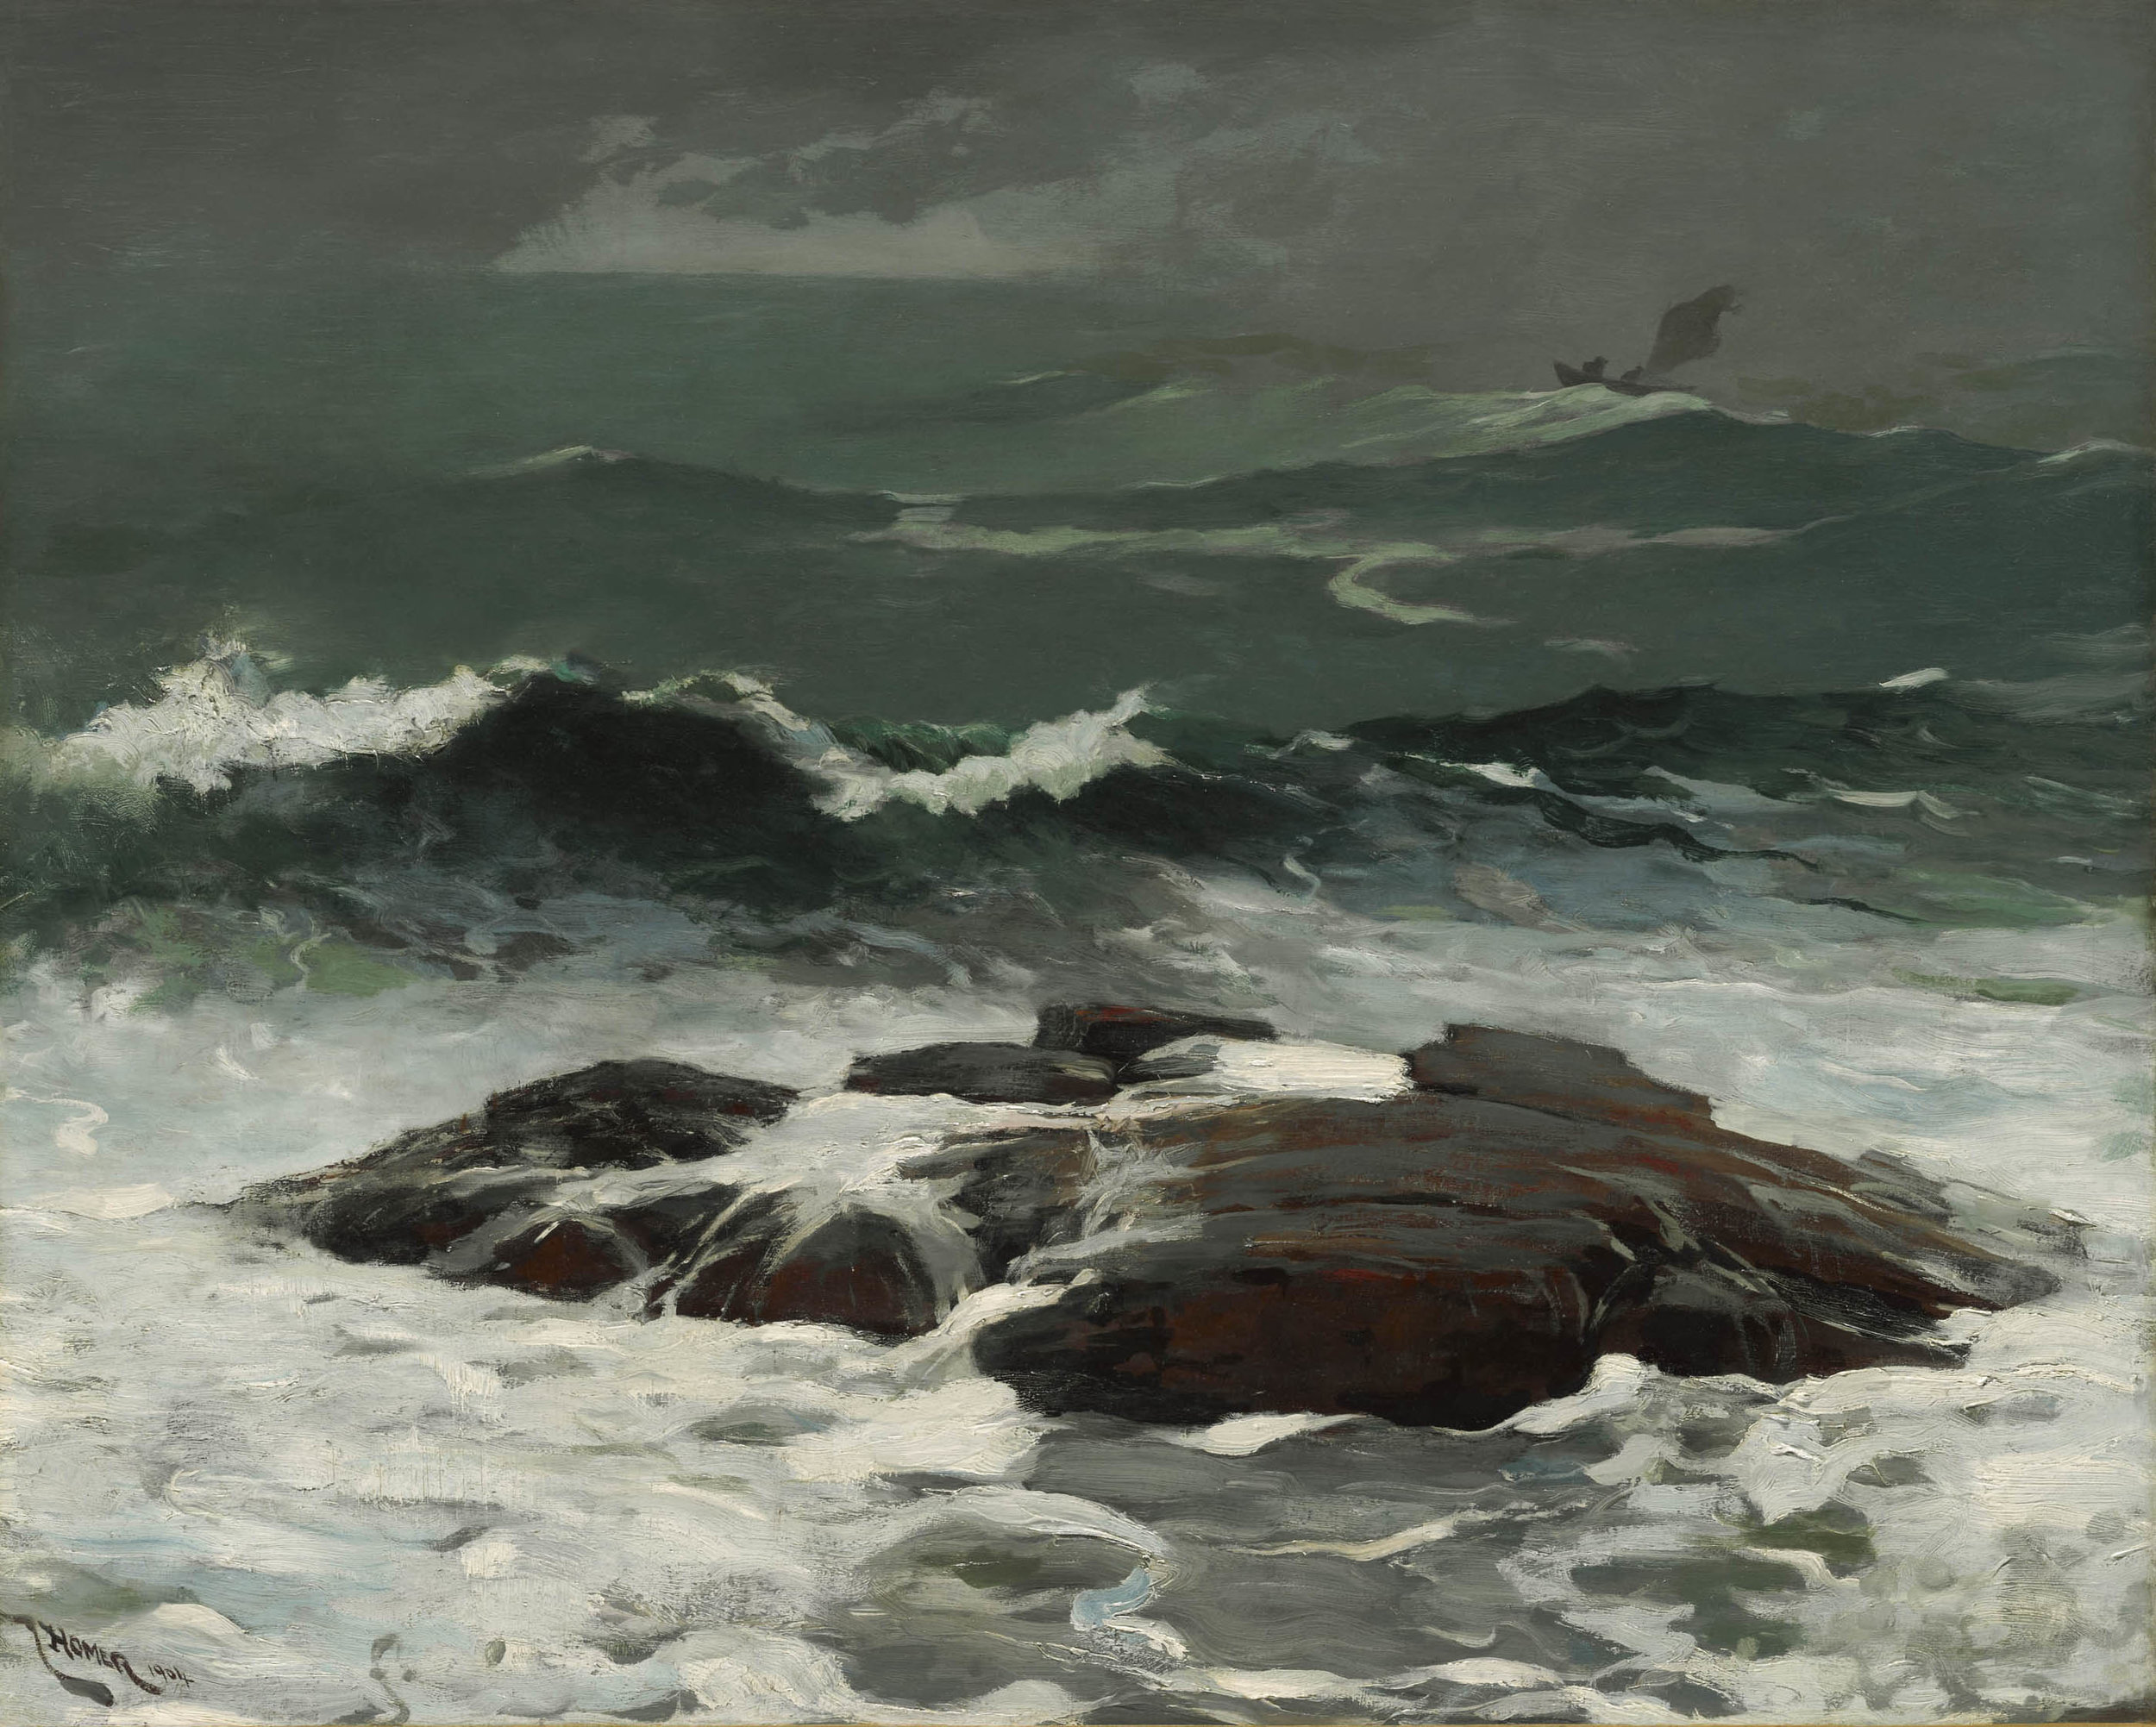  Winslow Homer (American, 1836–1910), Summer Squall, 1904. Oil on canvas, 24 1/4 x 30 1/4 in. (61.6 x 76.8 cm). Sterling and Francine Clark Art Institute, Williamstown, Massachusetts, 1955.8 